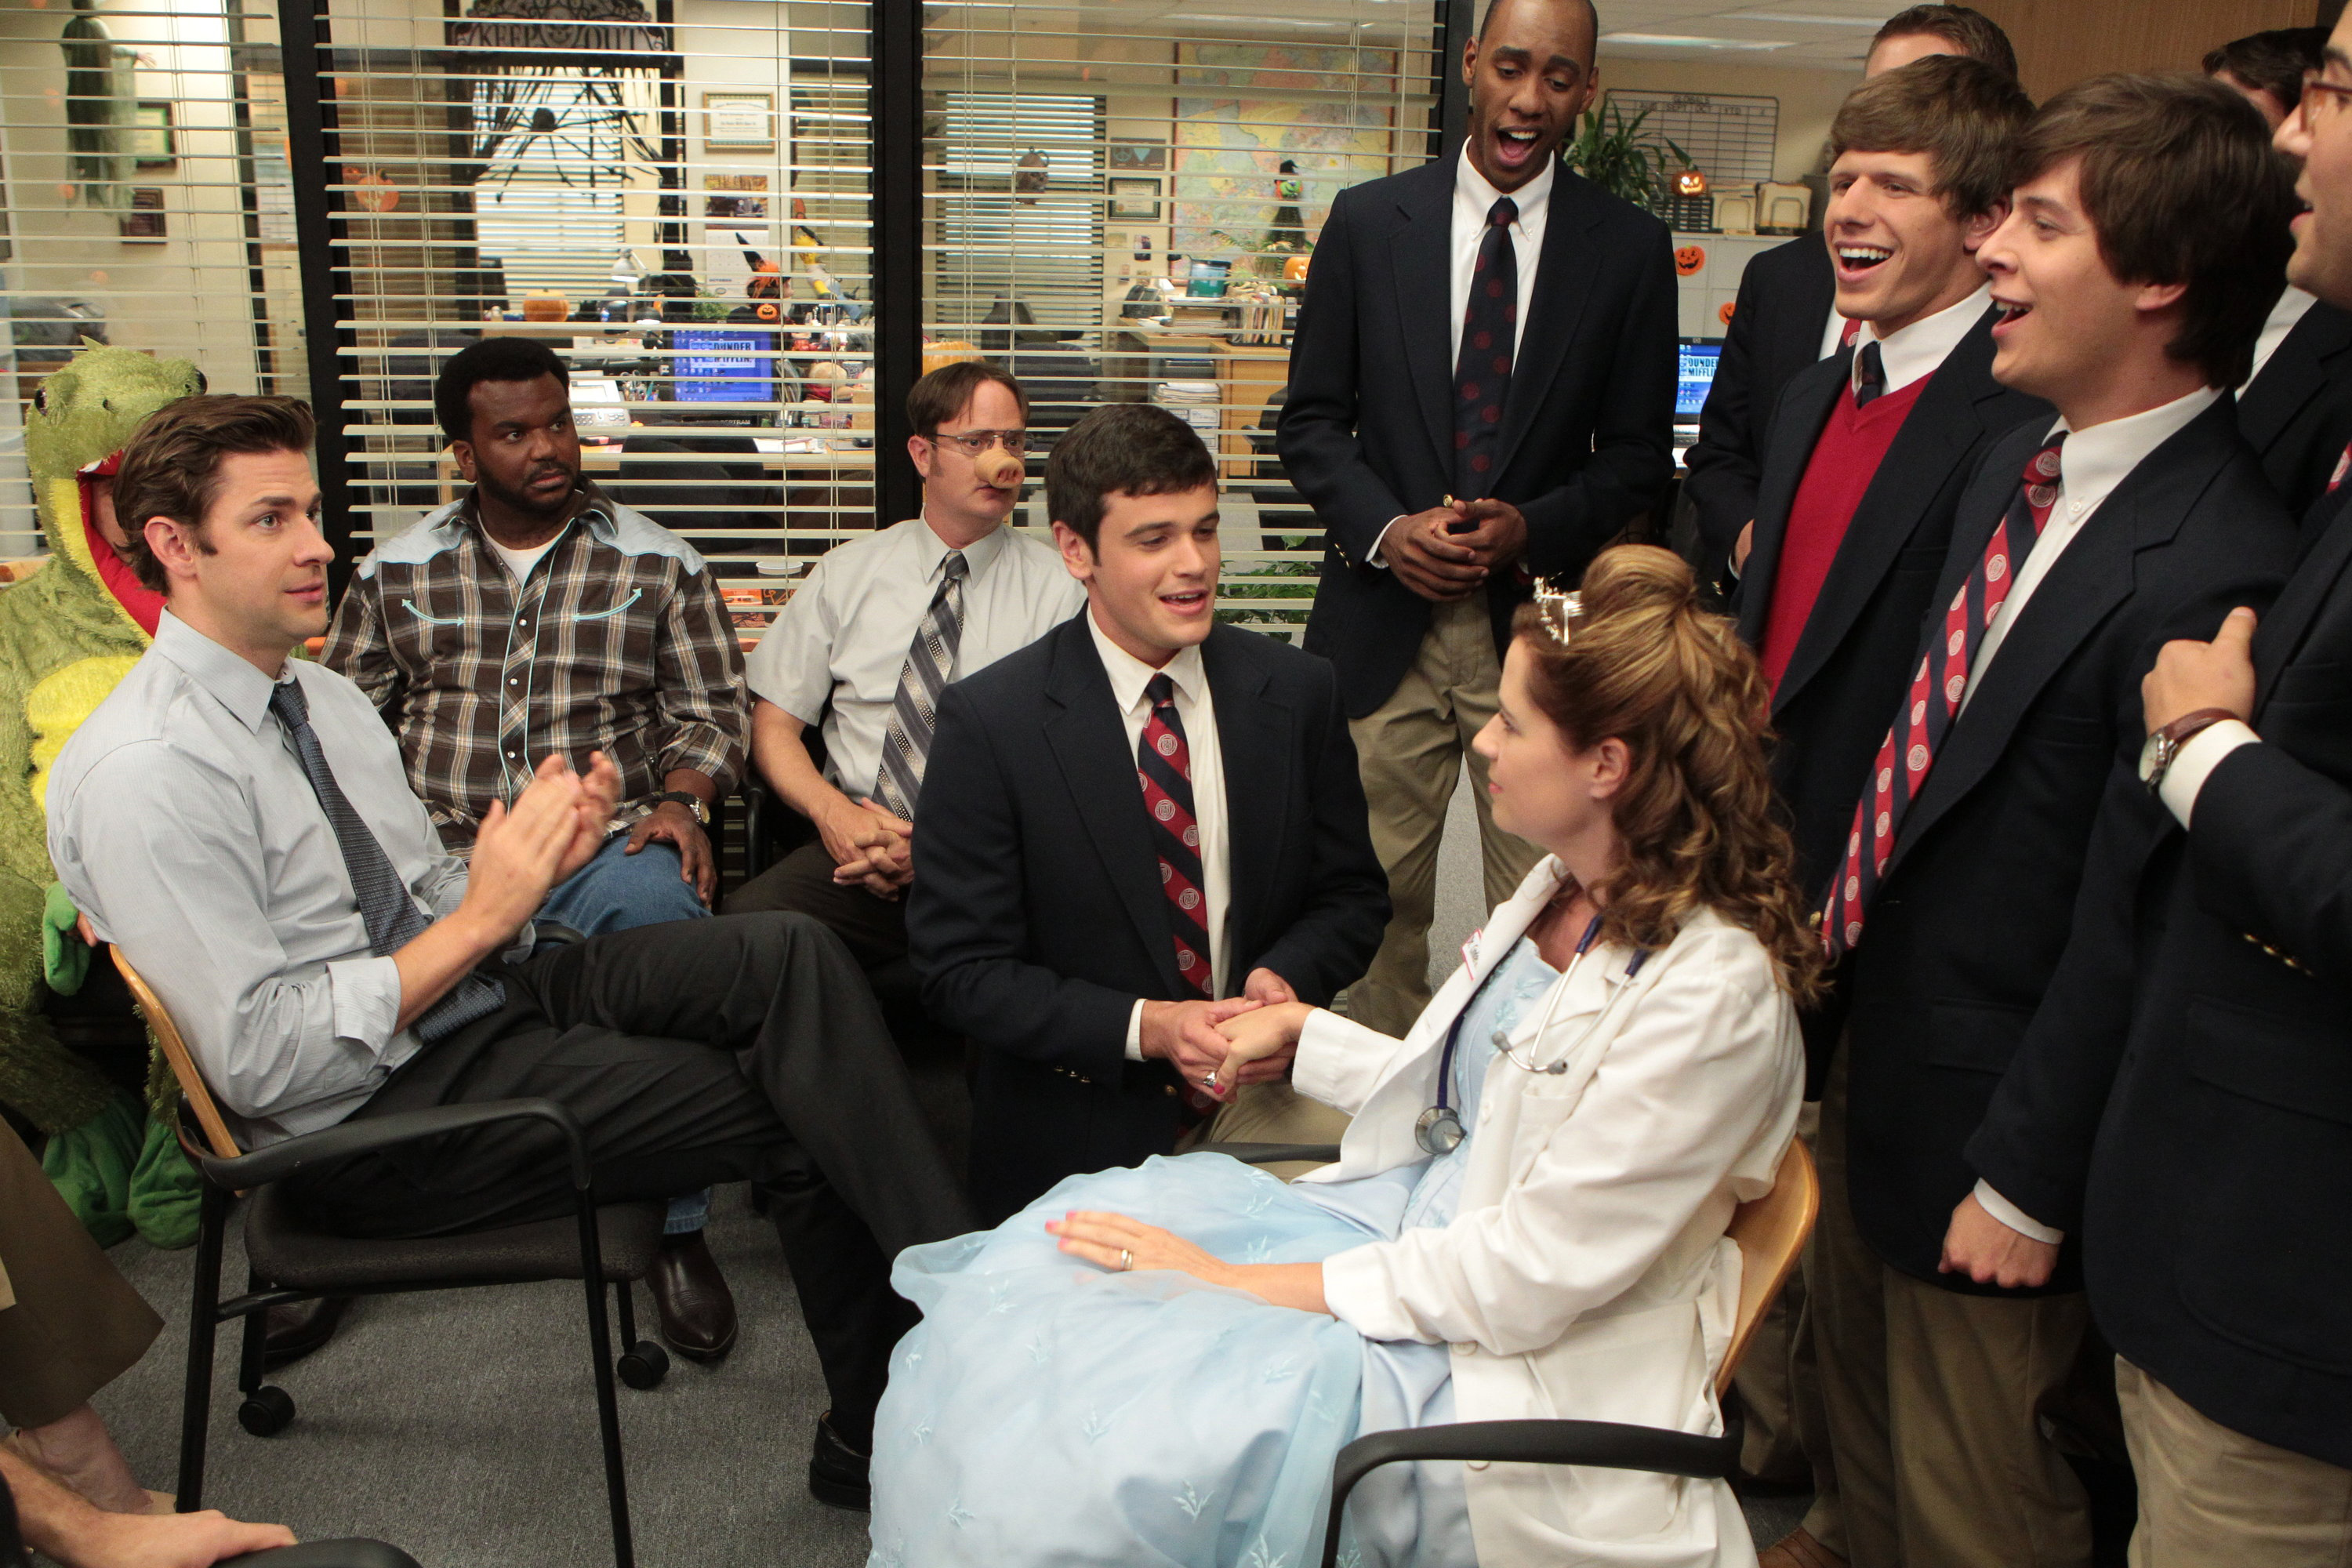 Nicholas Cafero (center) singing to pam on the office